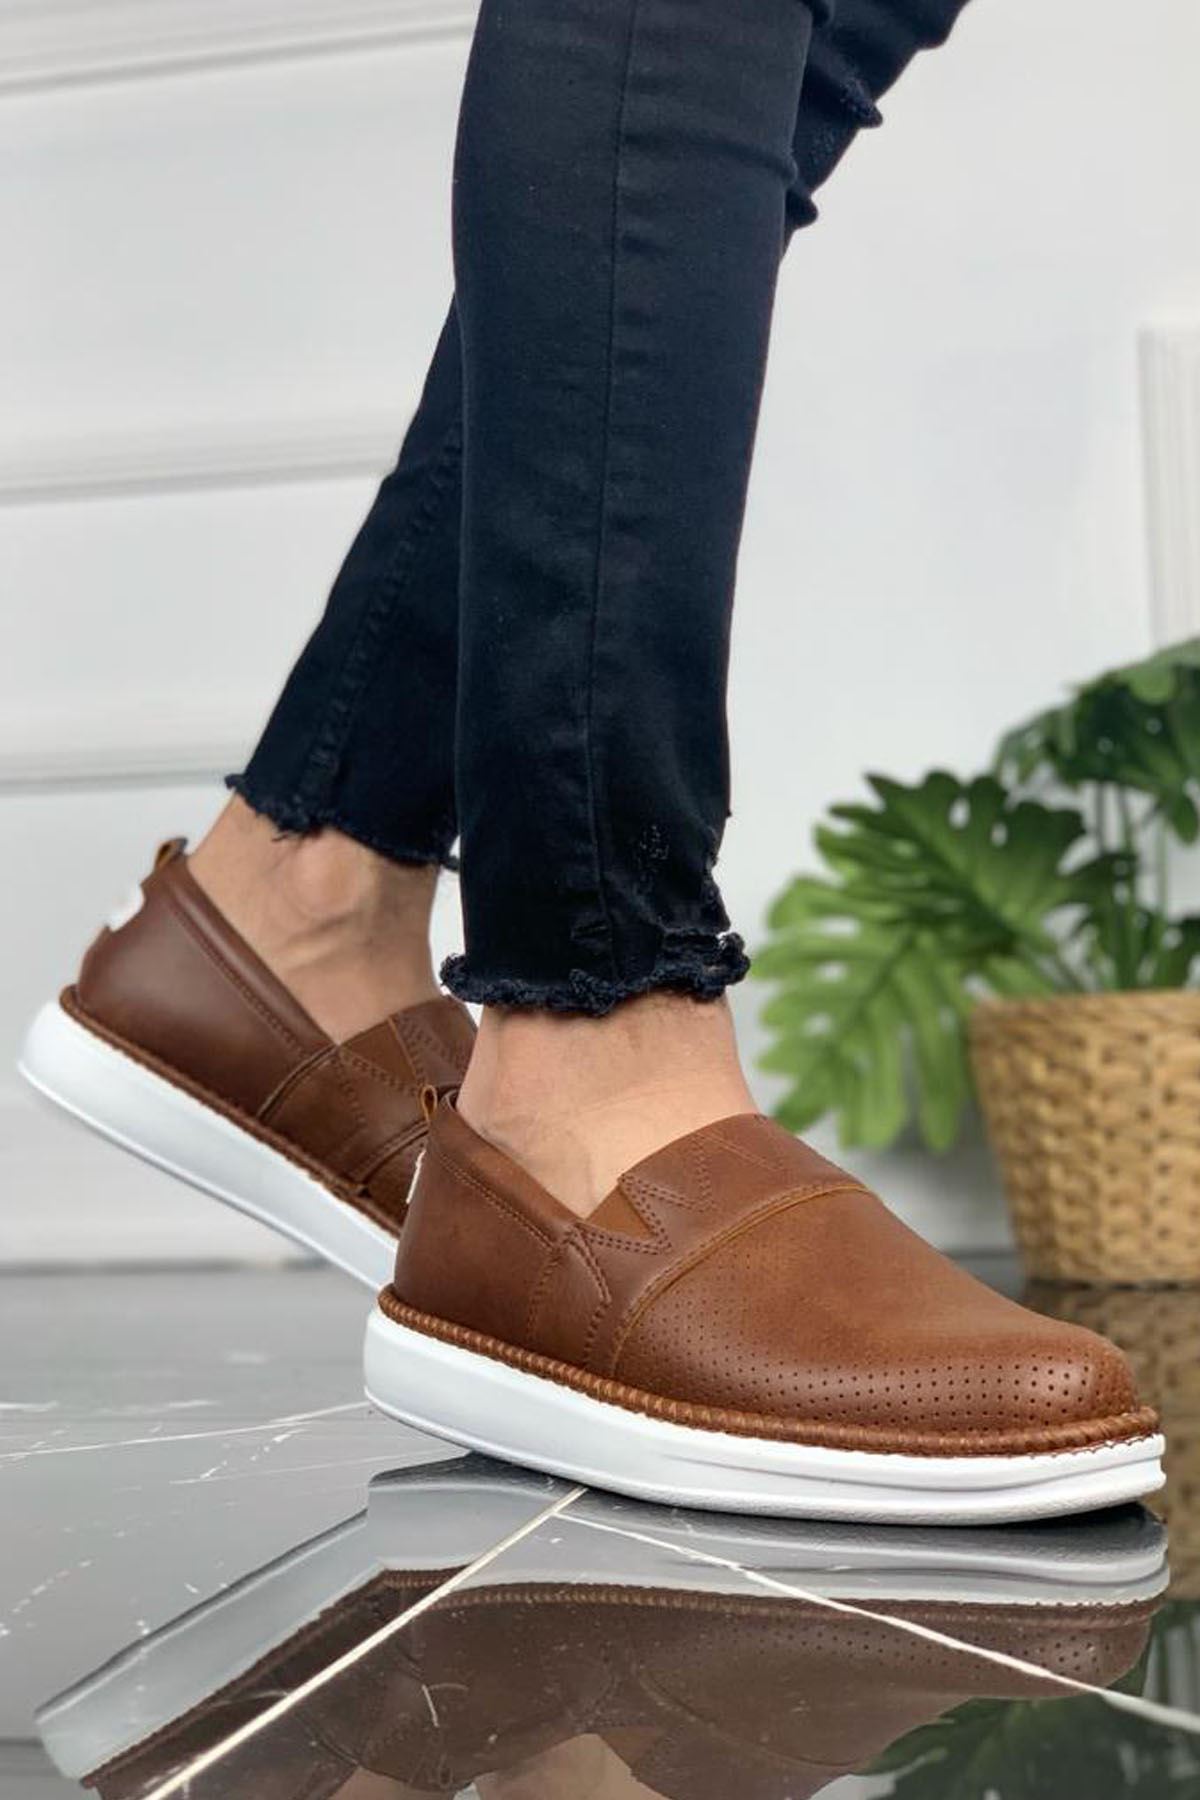 Chekich Men's Shoes Tan Color Artificial Leather Slip On Spring and Fall Seasons Sneakers Casual Brown Breathable Lightweight Luxury Comfortable White Base High Sole Gentlemen Footwear Suits Solid Walking CH091 V5